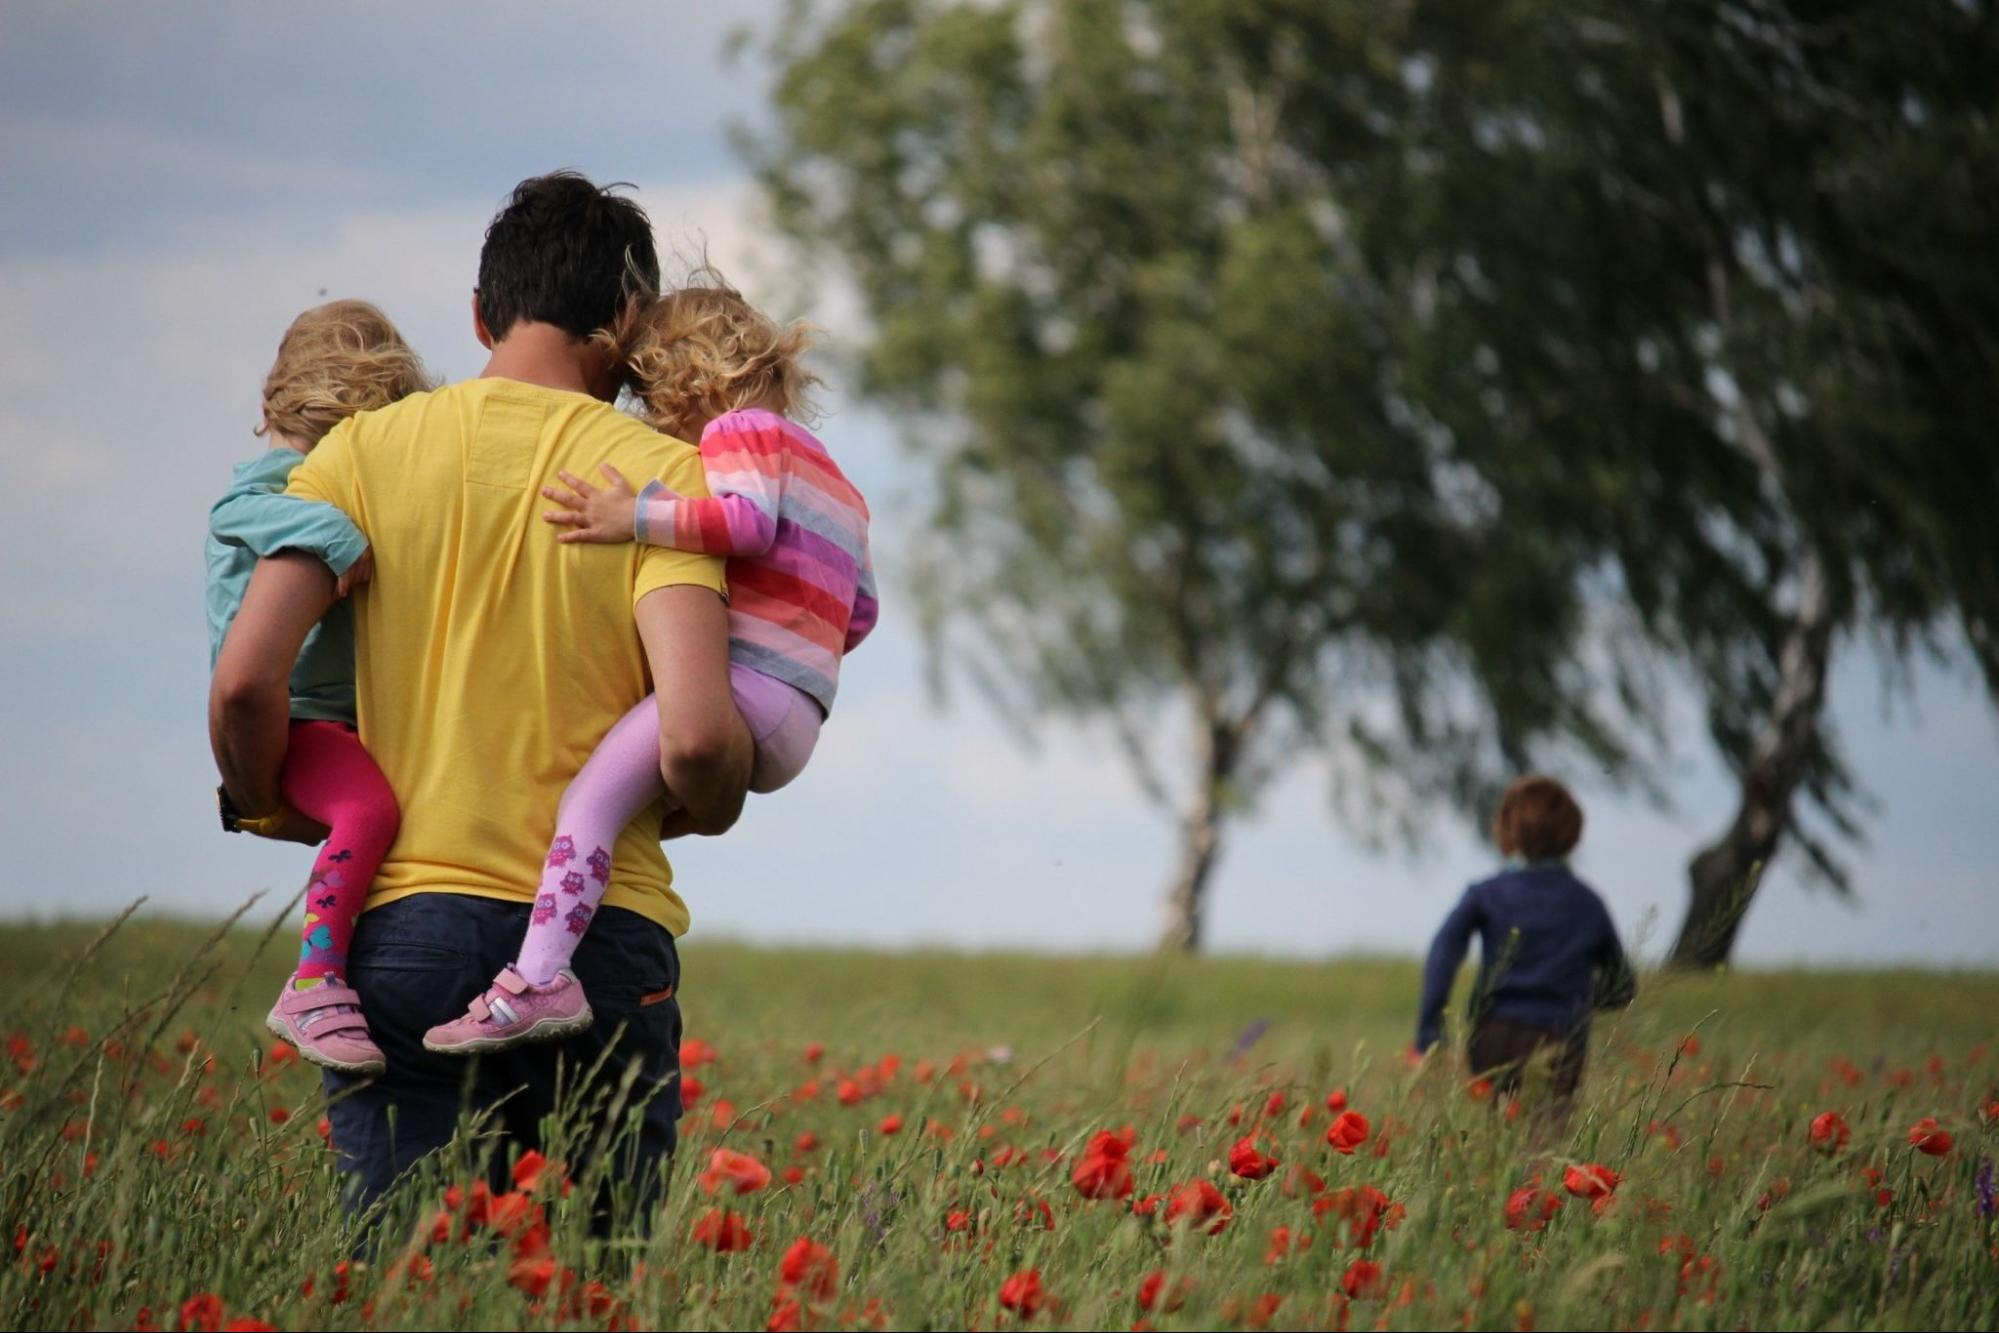 A dad carries two young children through a field while an older boy runs ahead.